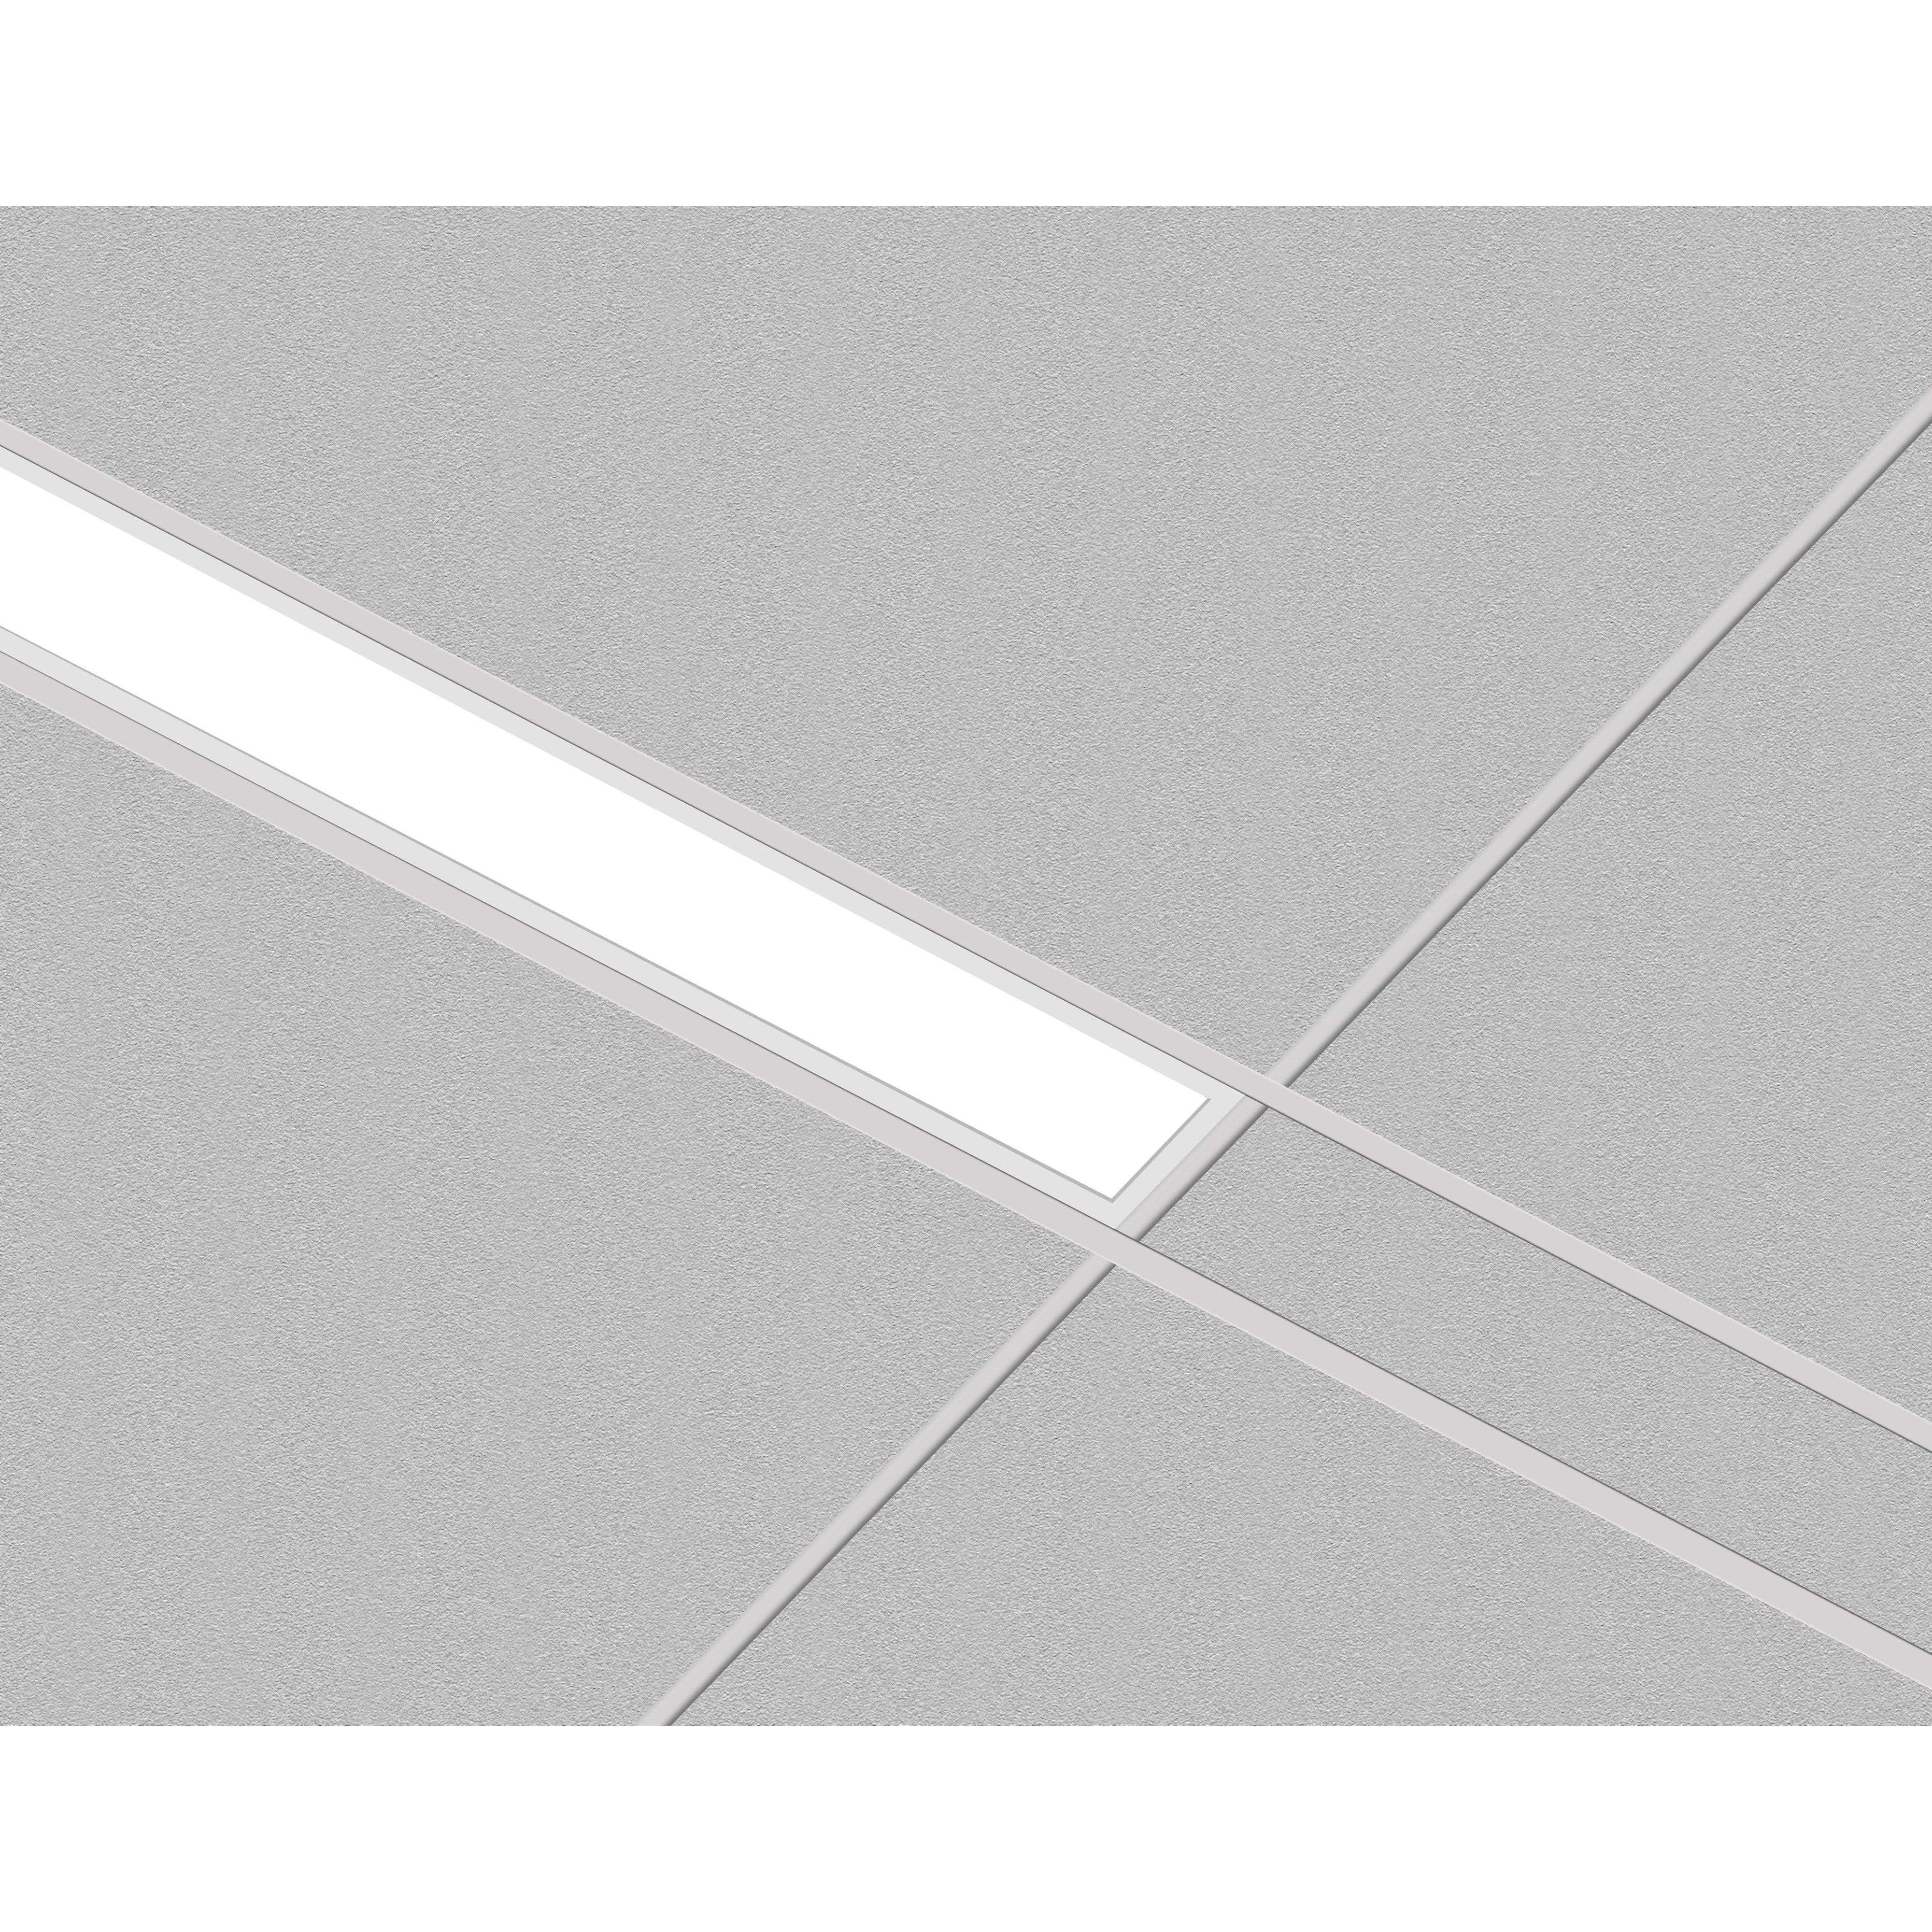 POE Texas Lighting Denton Linear Recessed PoE Lights - 6 in x 4 ft (Surface)